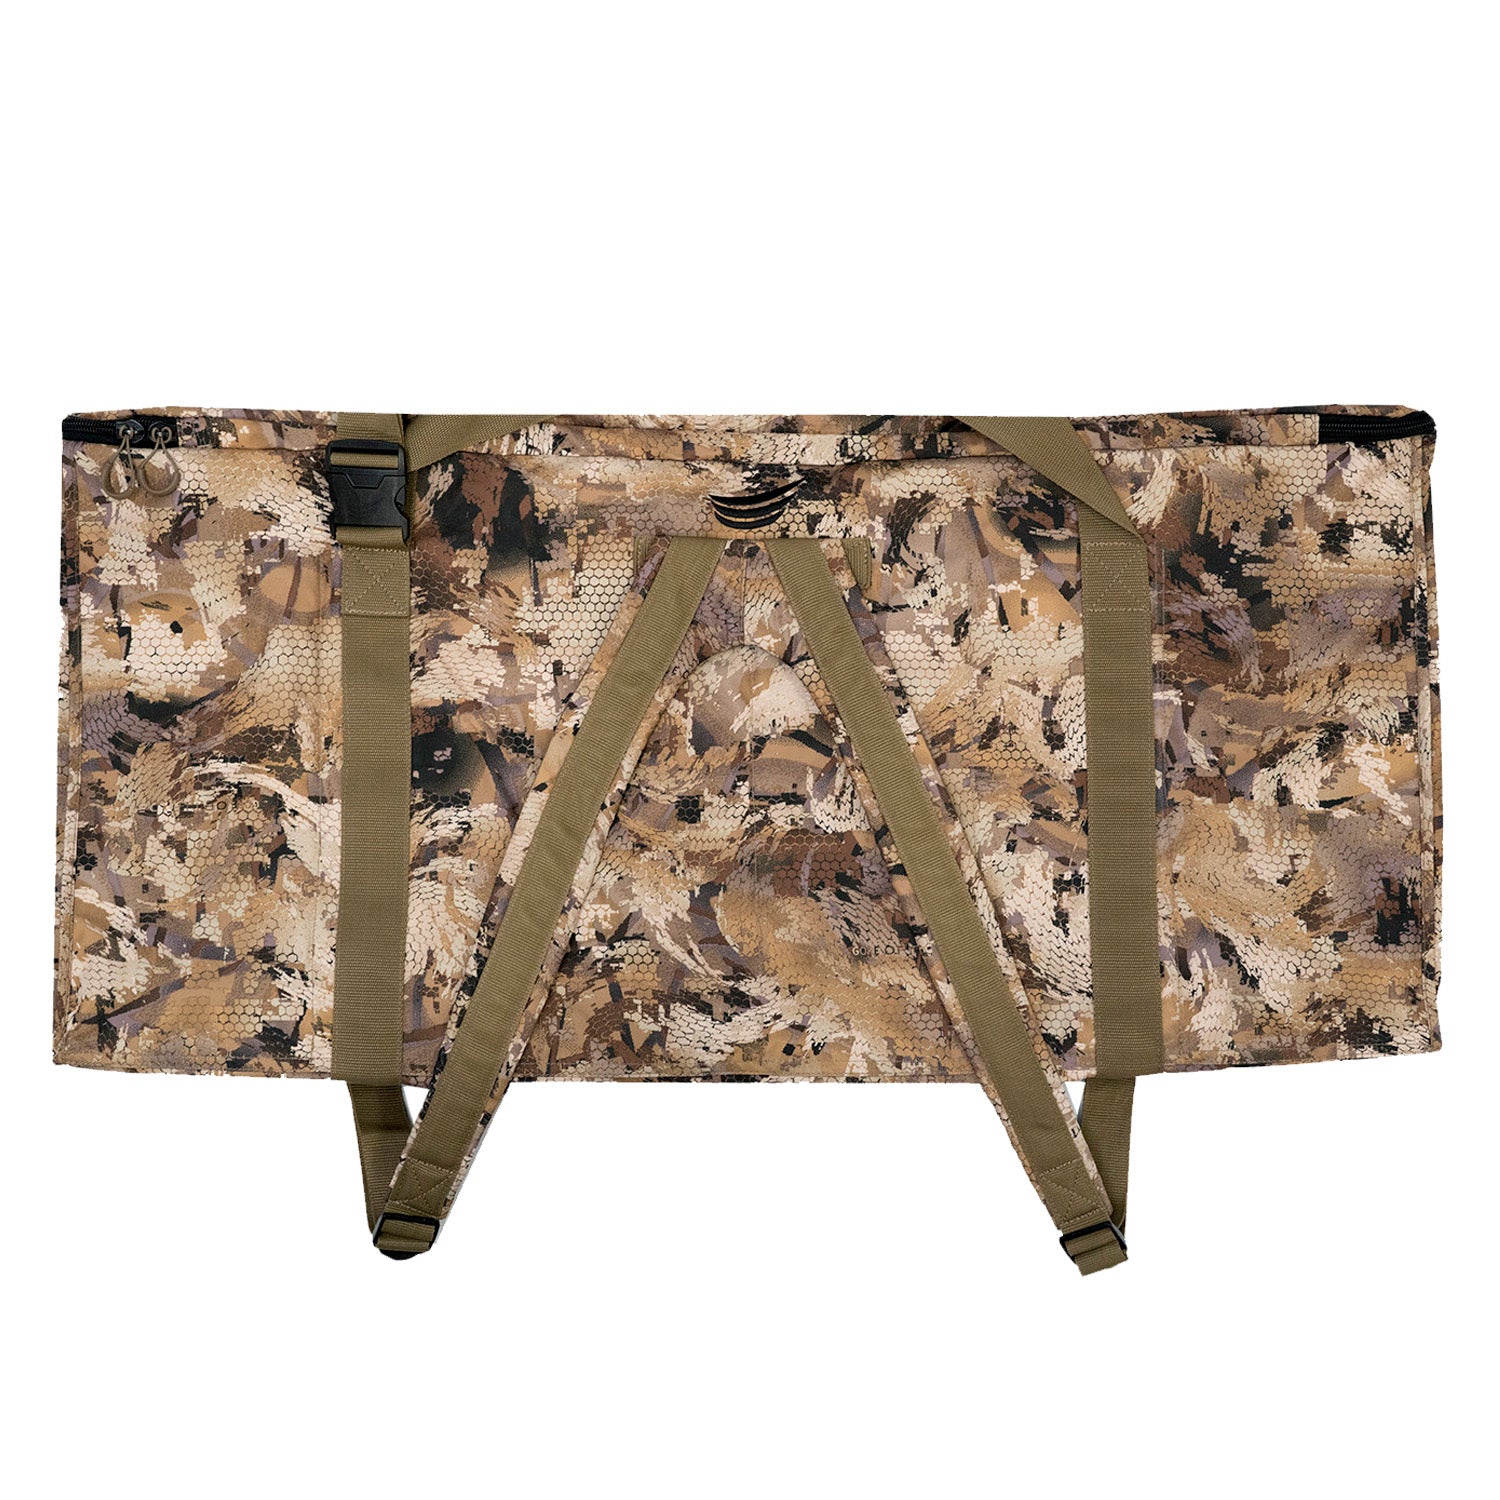  LIFXIZE 12 Slot Duck Decoy Bag with Carrying Padded Shoulders  Hunting Blind Camo Printing Duck Decoy Bag with Smart Mesh Bottom Drainage  System : Sports & Outdoors